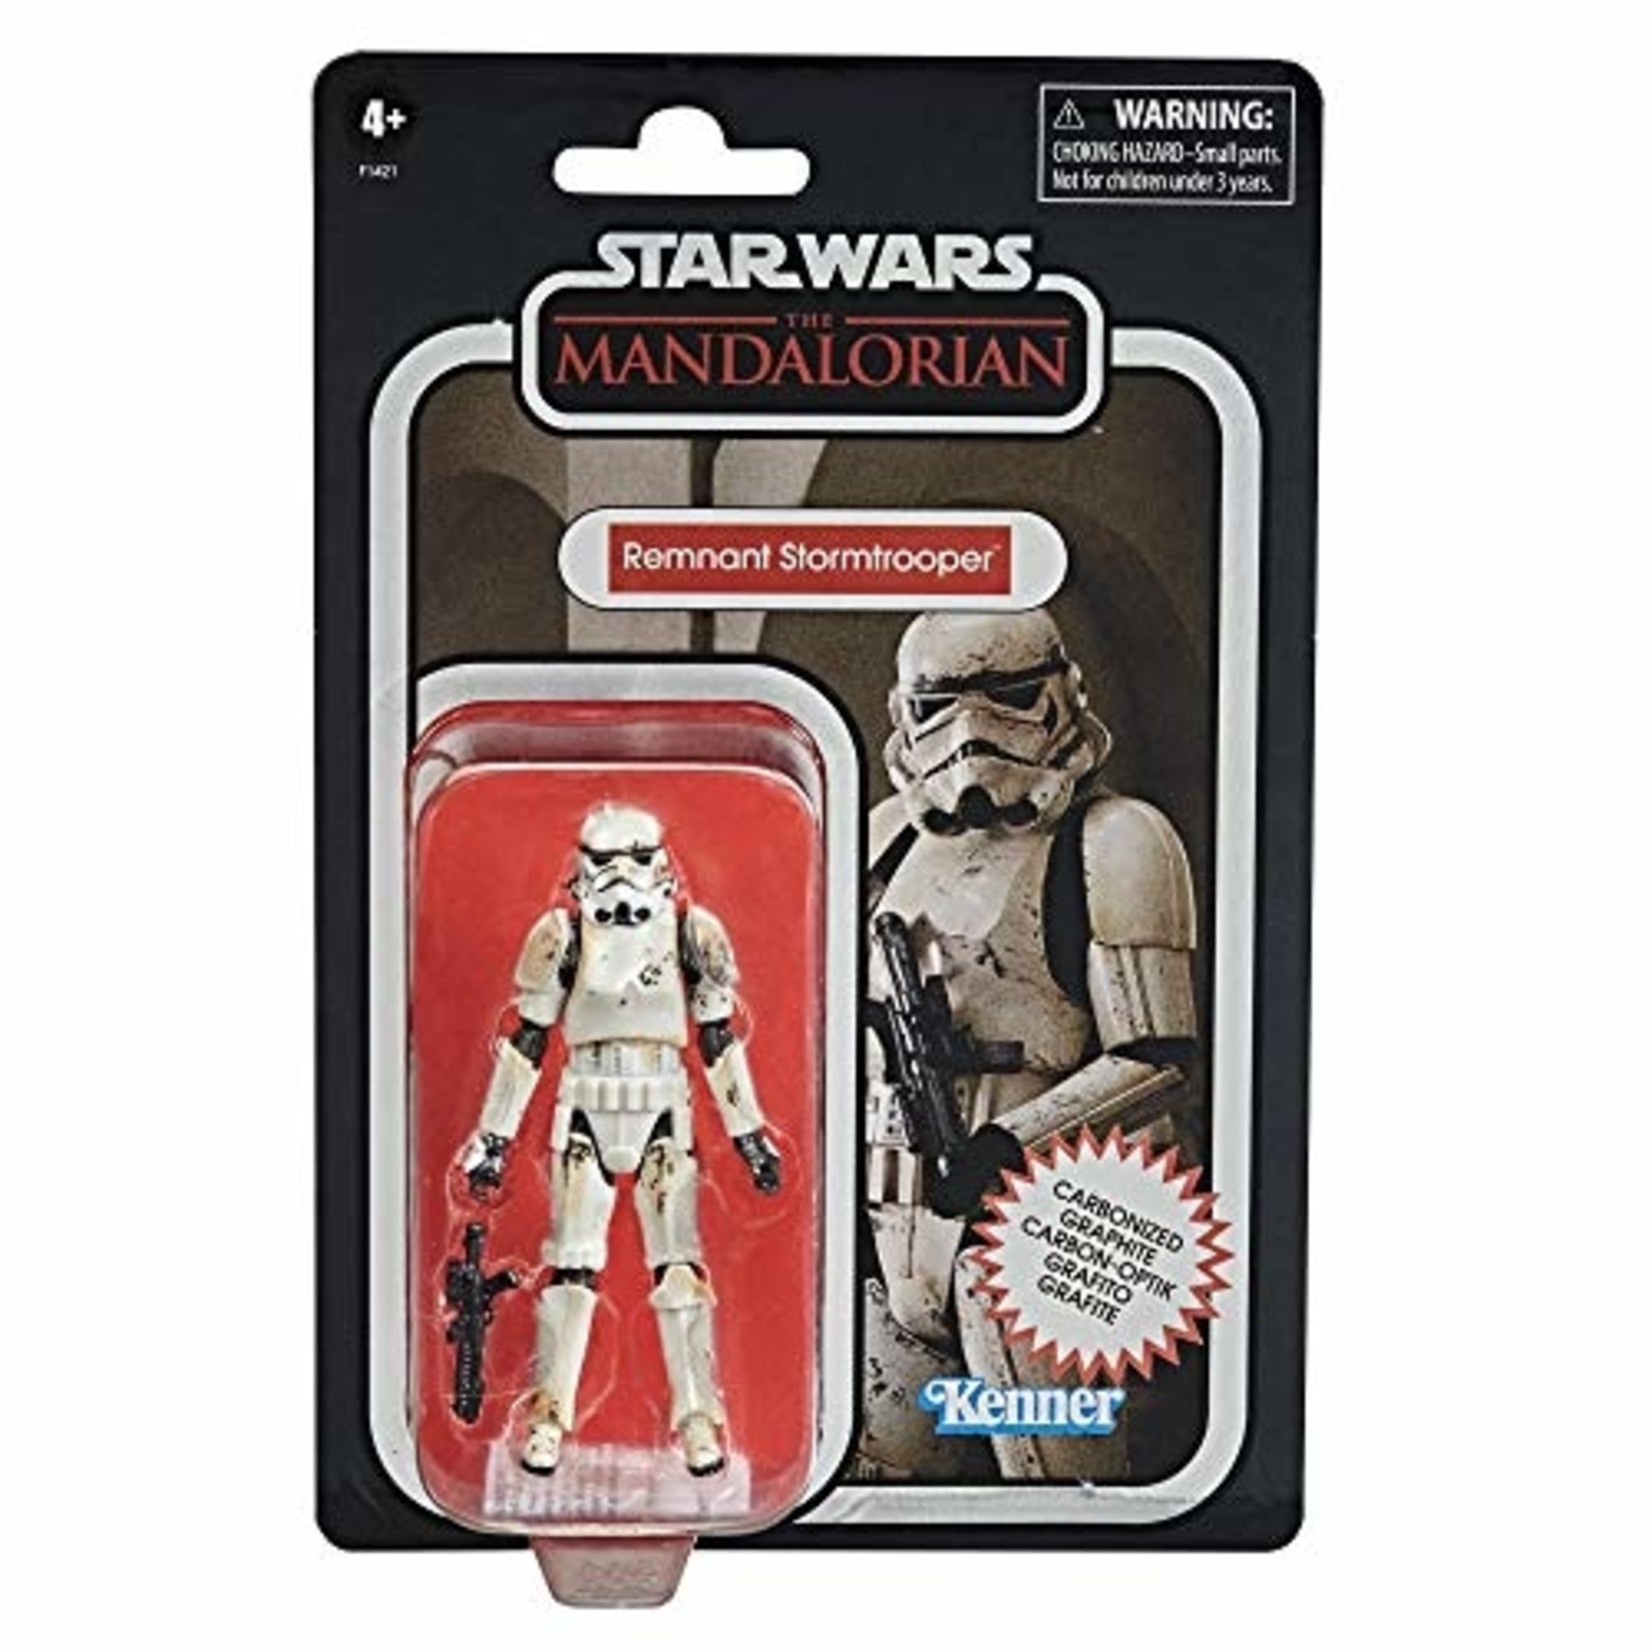 Star Wars The Black Series Star Wars: The Mandalorian - Remnant Stormtrooper - Vintage Carbonized Collection